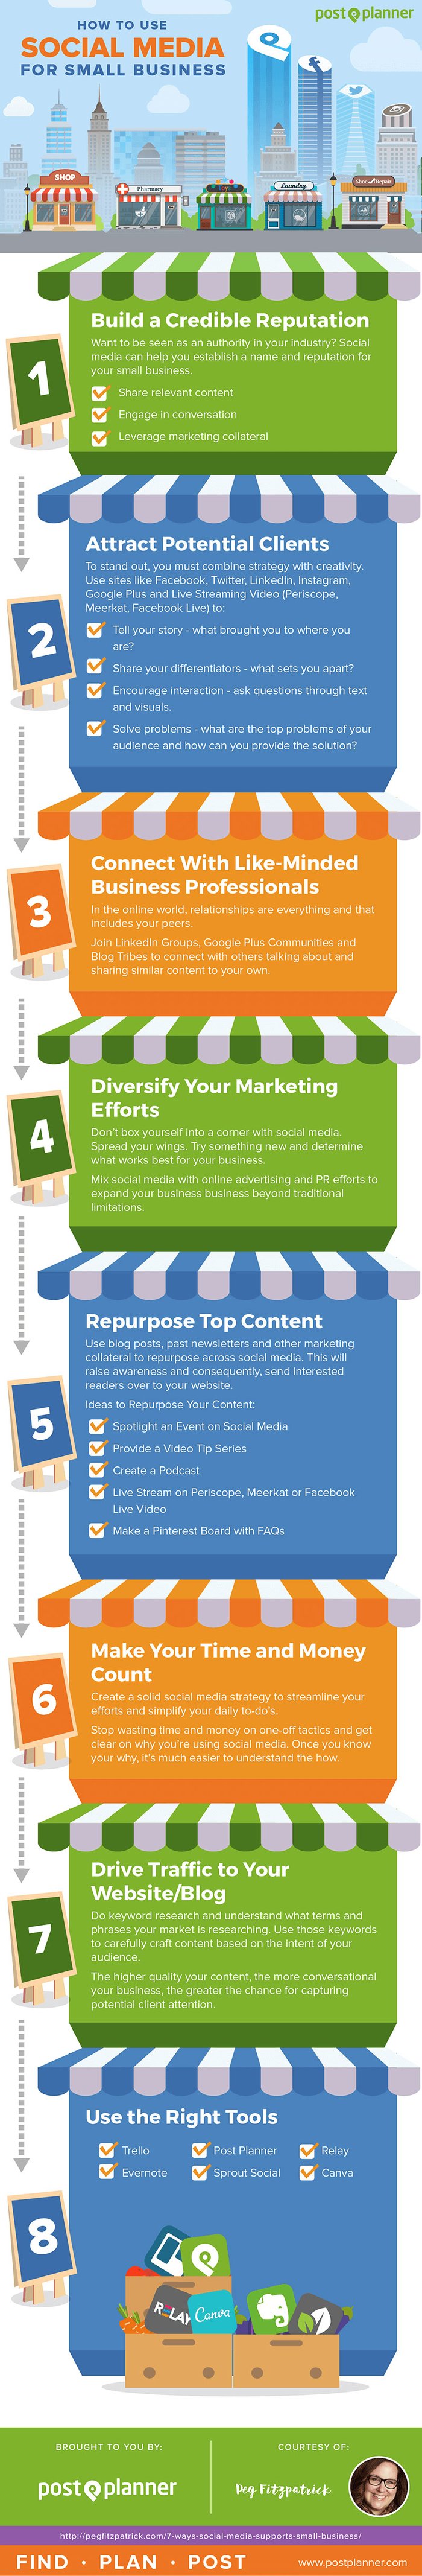 How-to-Use-Social-Media-for-Your-Small-Business-Infographic